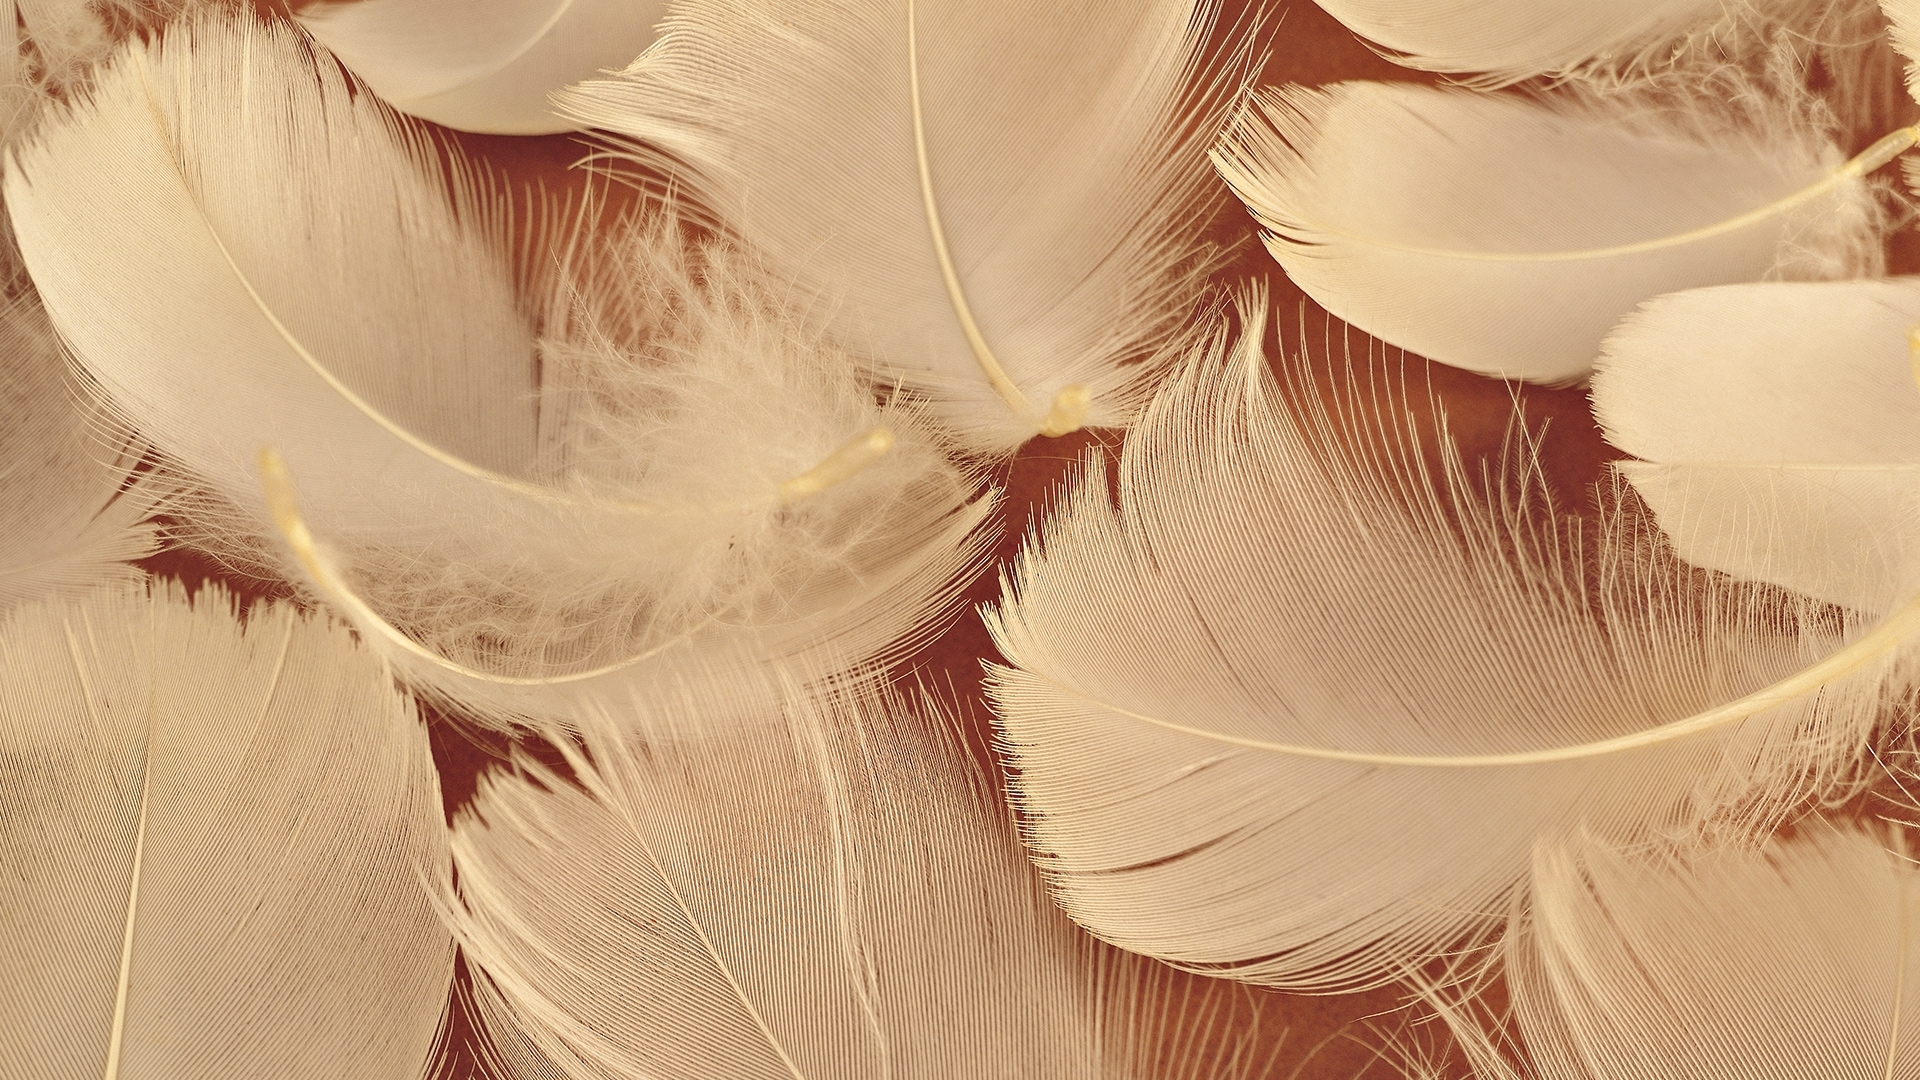 Feather 1920 x 1080 HD Wallpaper